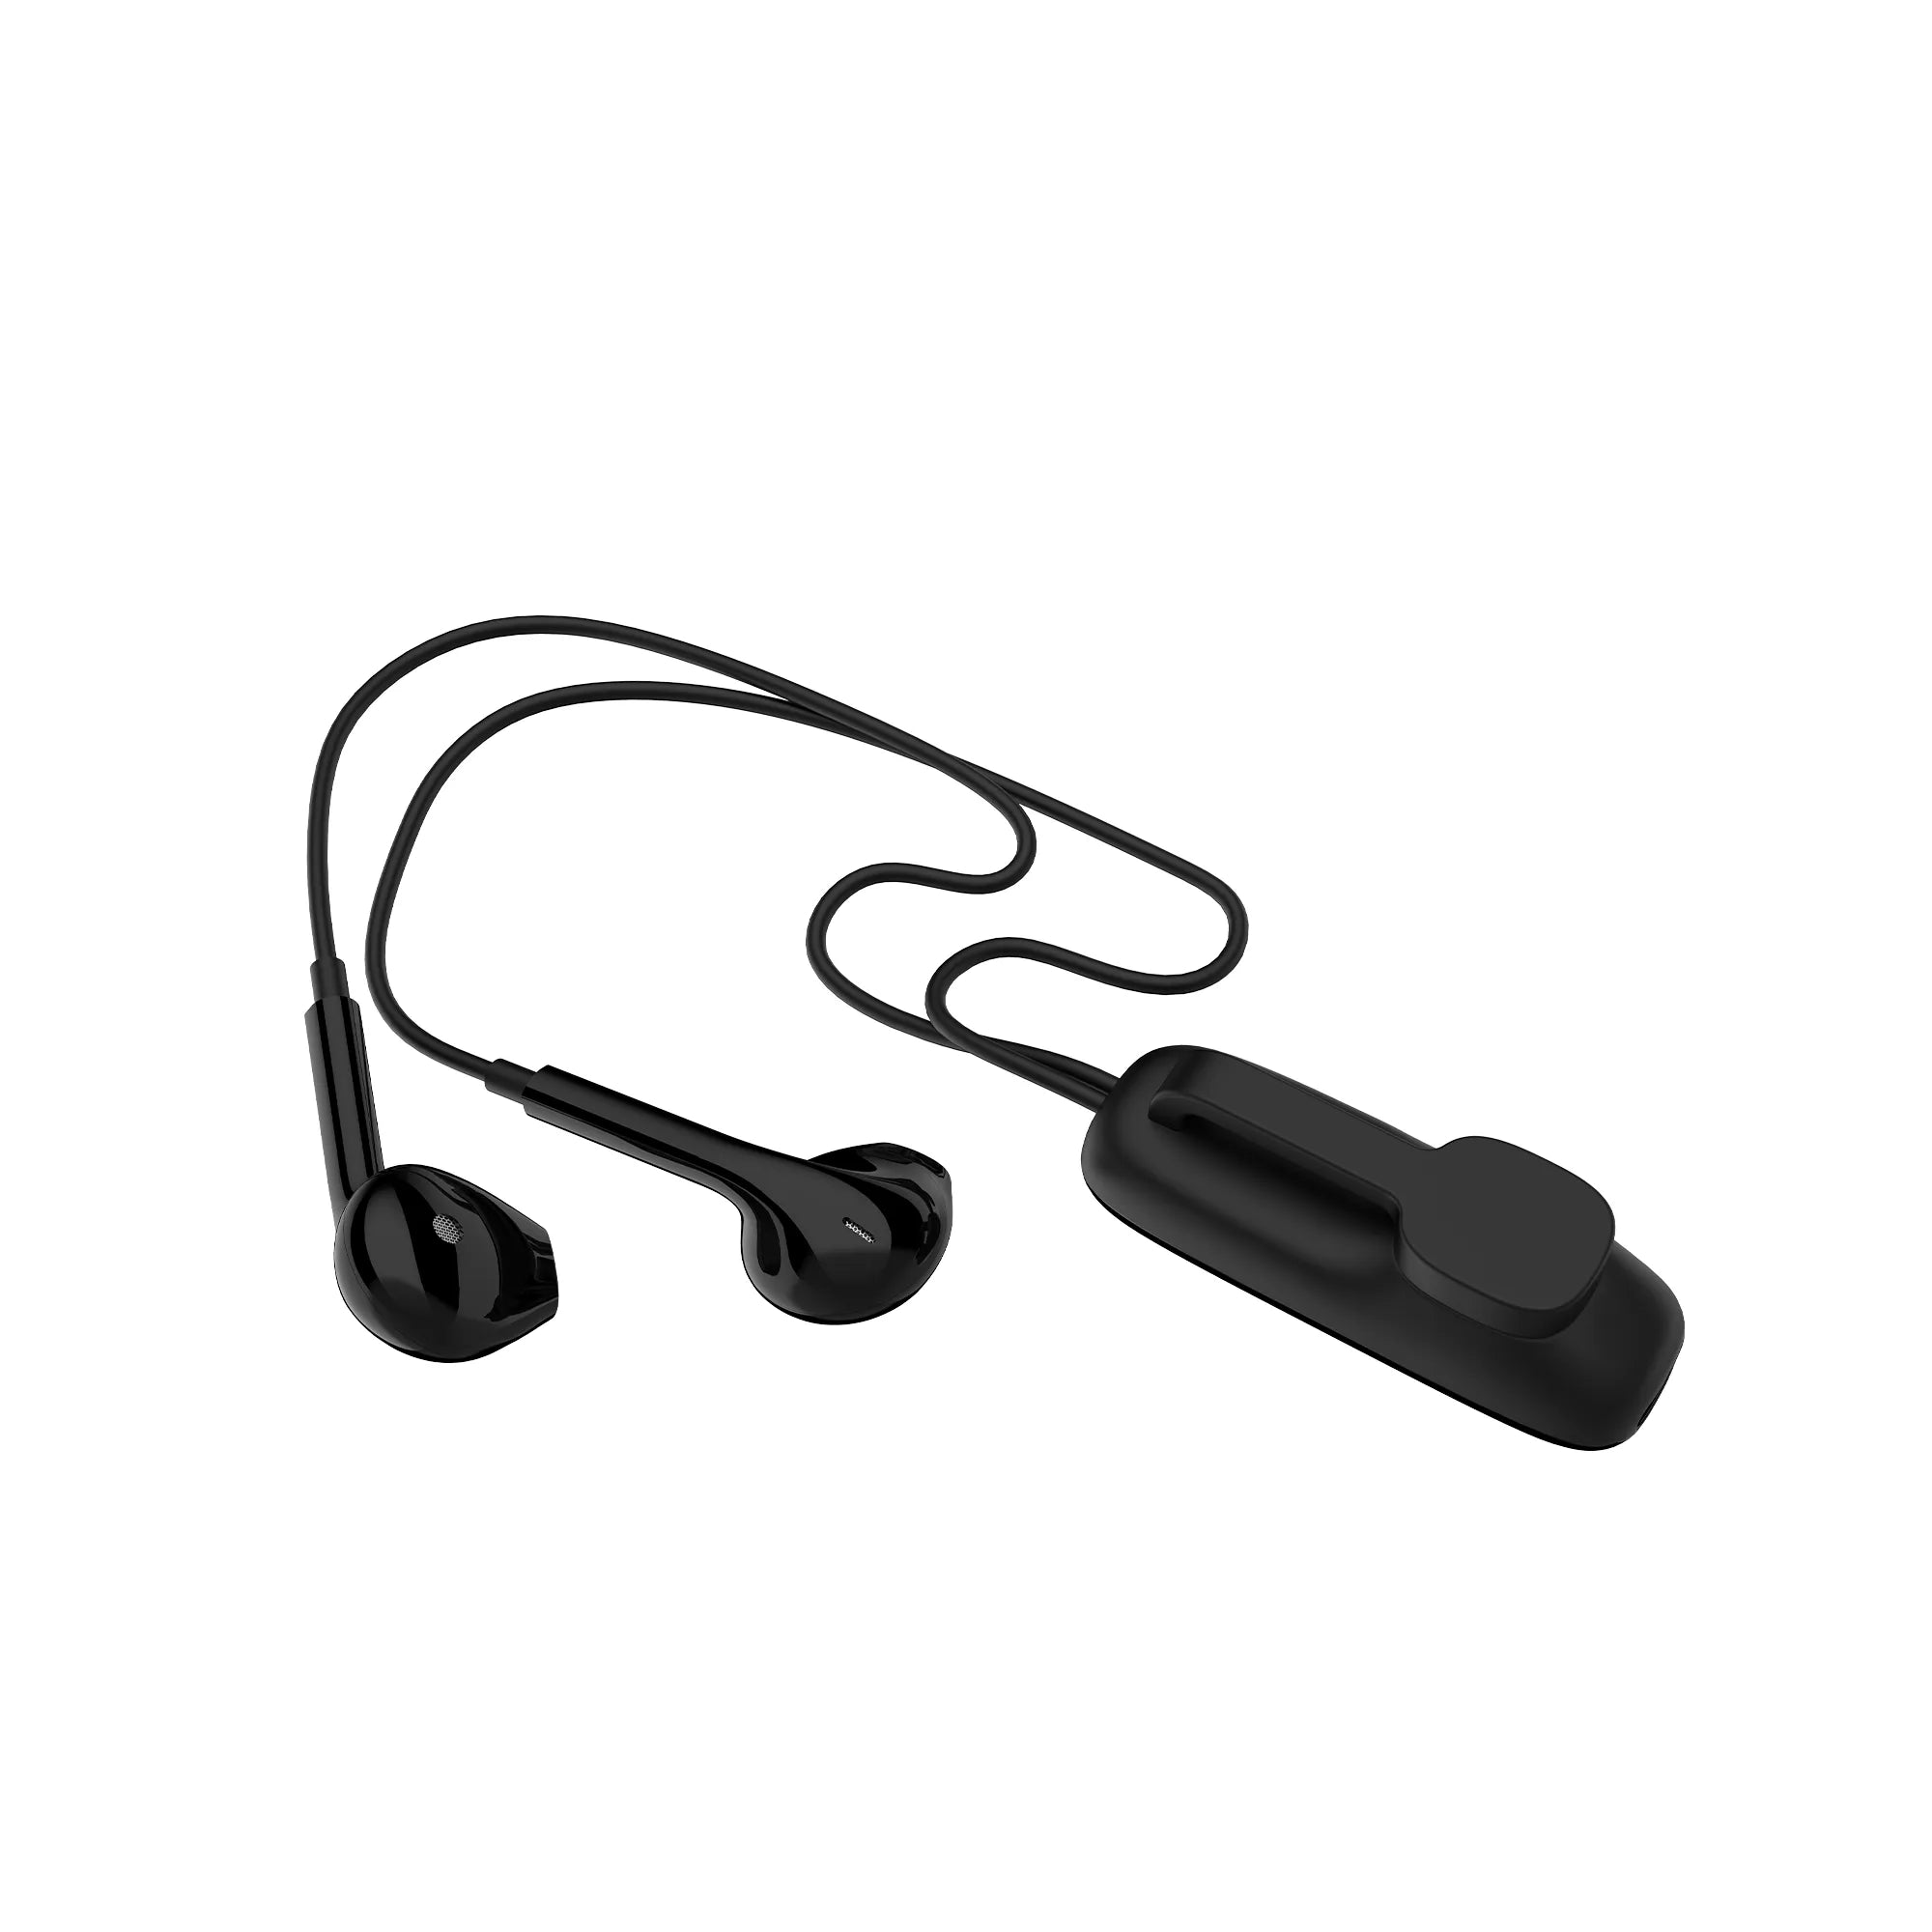 WiWU Bluetooth Wired Earphone with strong Mangetic Clamp Sports Earbuds Stereo Sound HiFi Wired Headphone with Mic